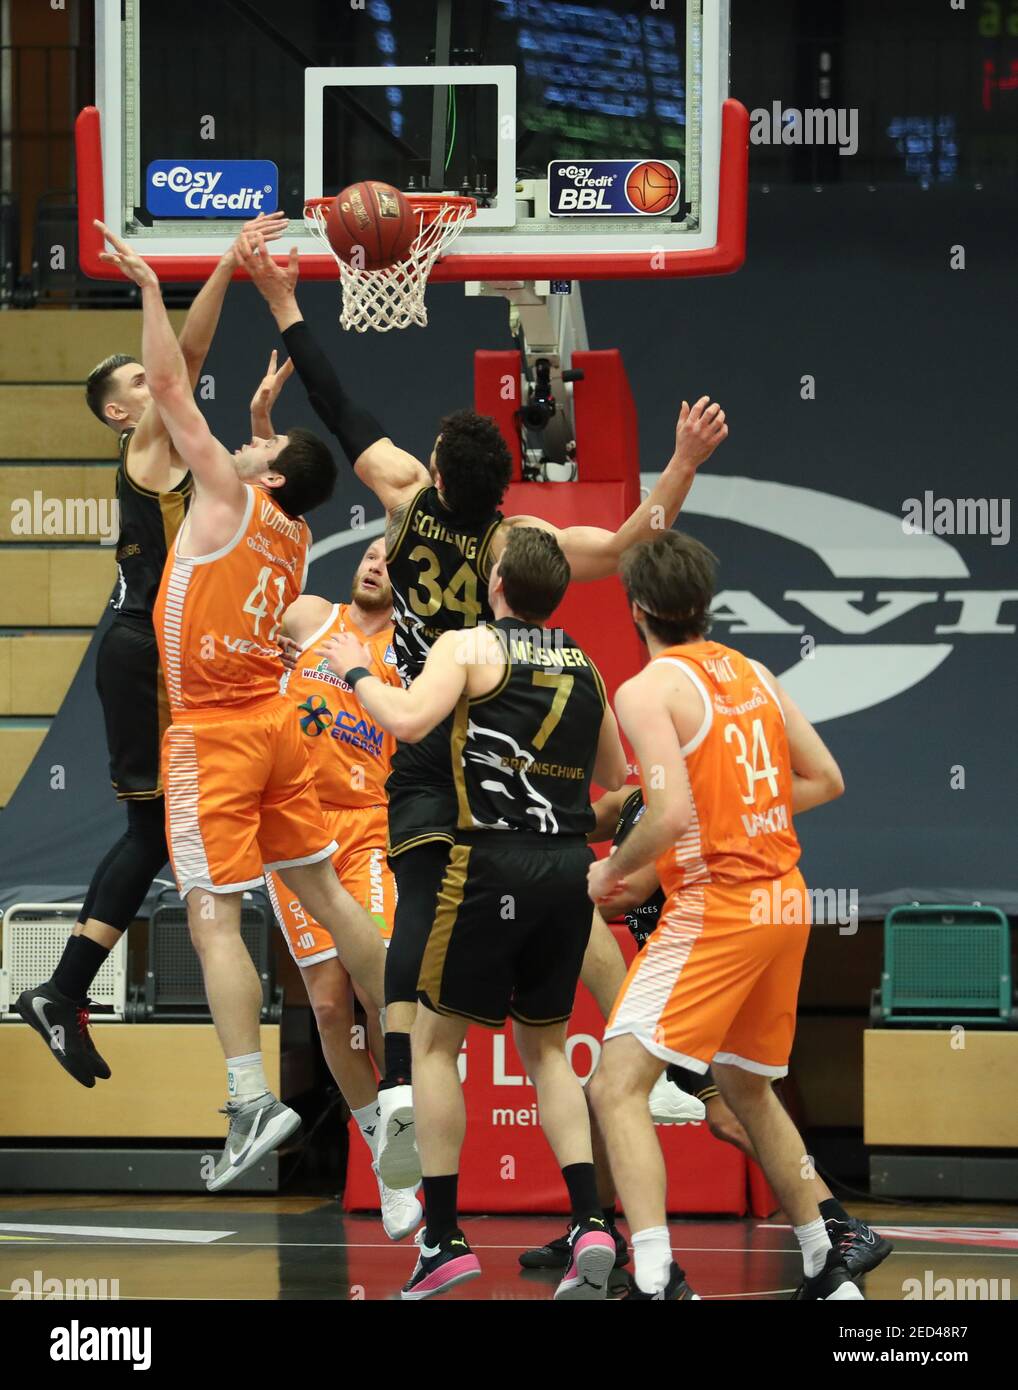 Vechta, Germany. 14th Feb, 2021. Basketball: Bundesliga, SC Rasta Vechta -  BB Löwen Braunschweig, Matchday 19 at the Rasta Dome. Vechta's Will Vorhees  (2nd from left) and Jesse Hunt (r) in action